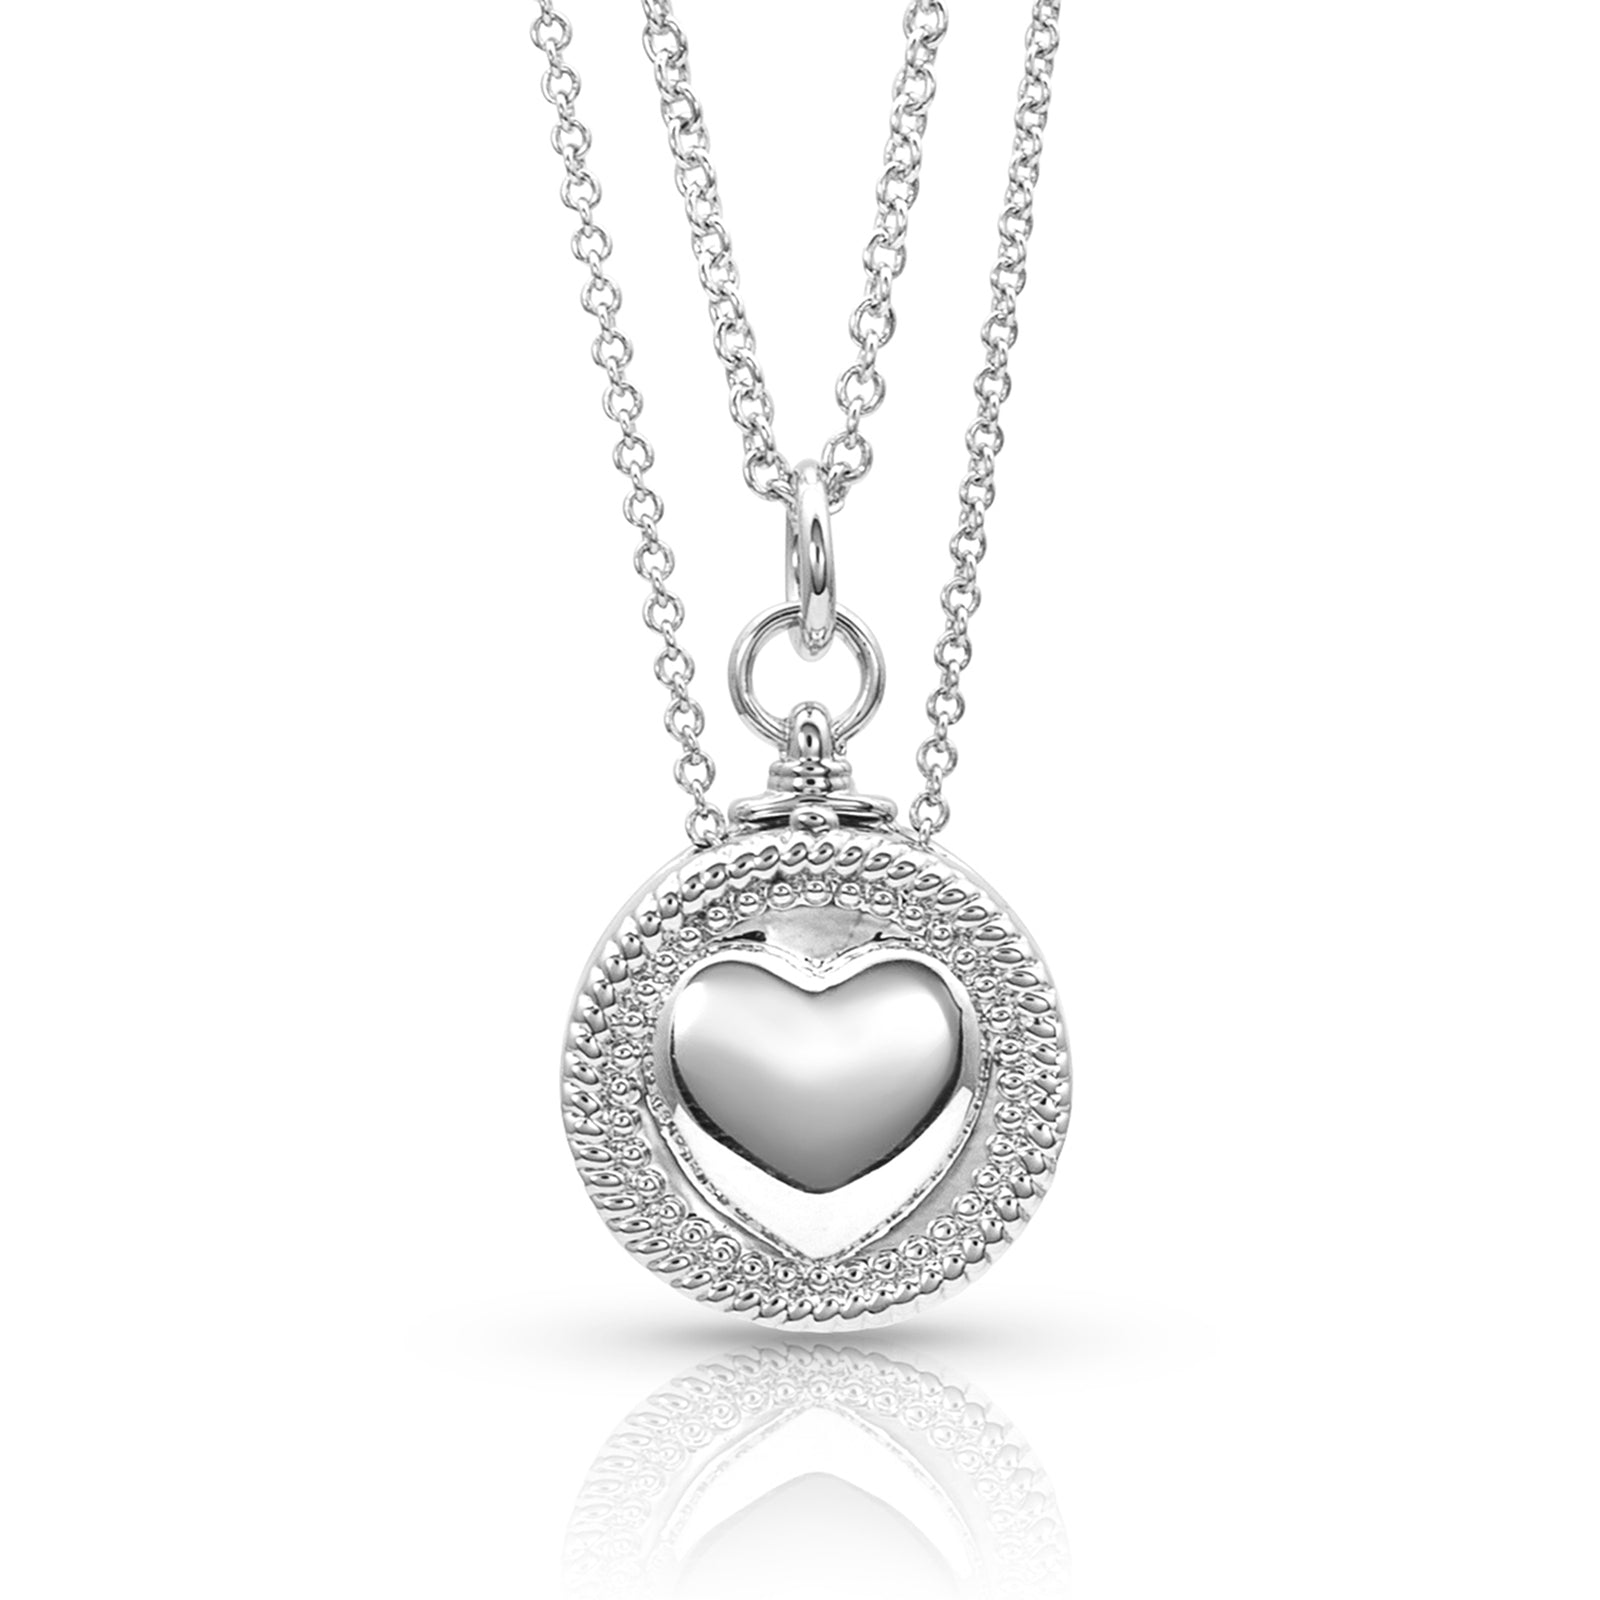 Every Second Counts Heart Locket Necklace